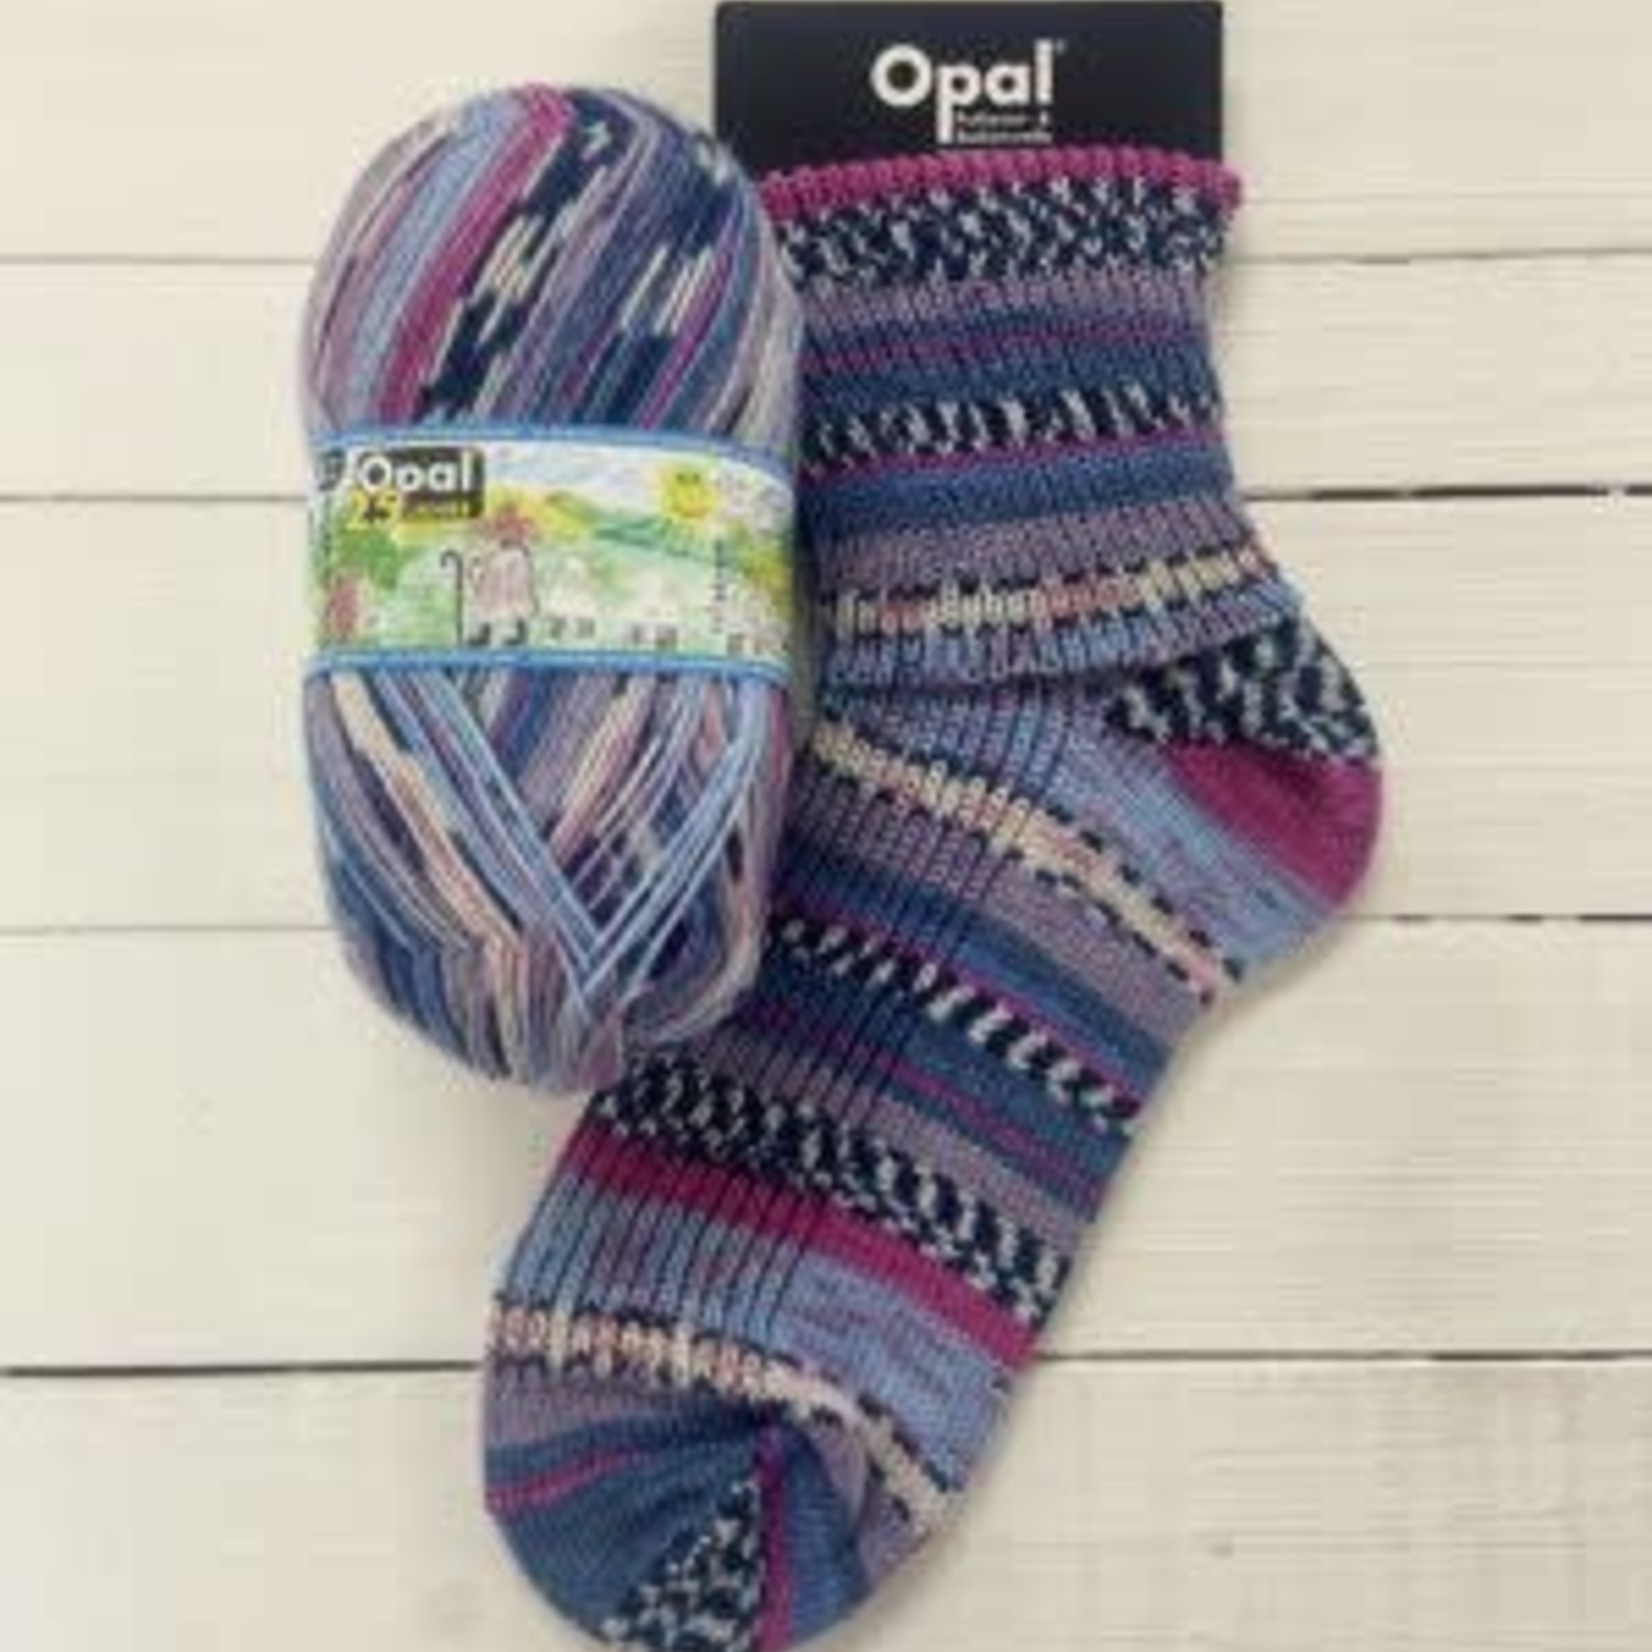 25th Anniversary (4 ply) by Opal